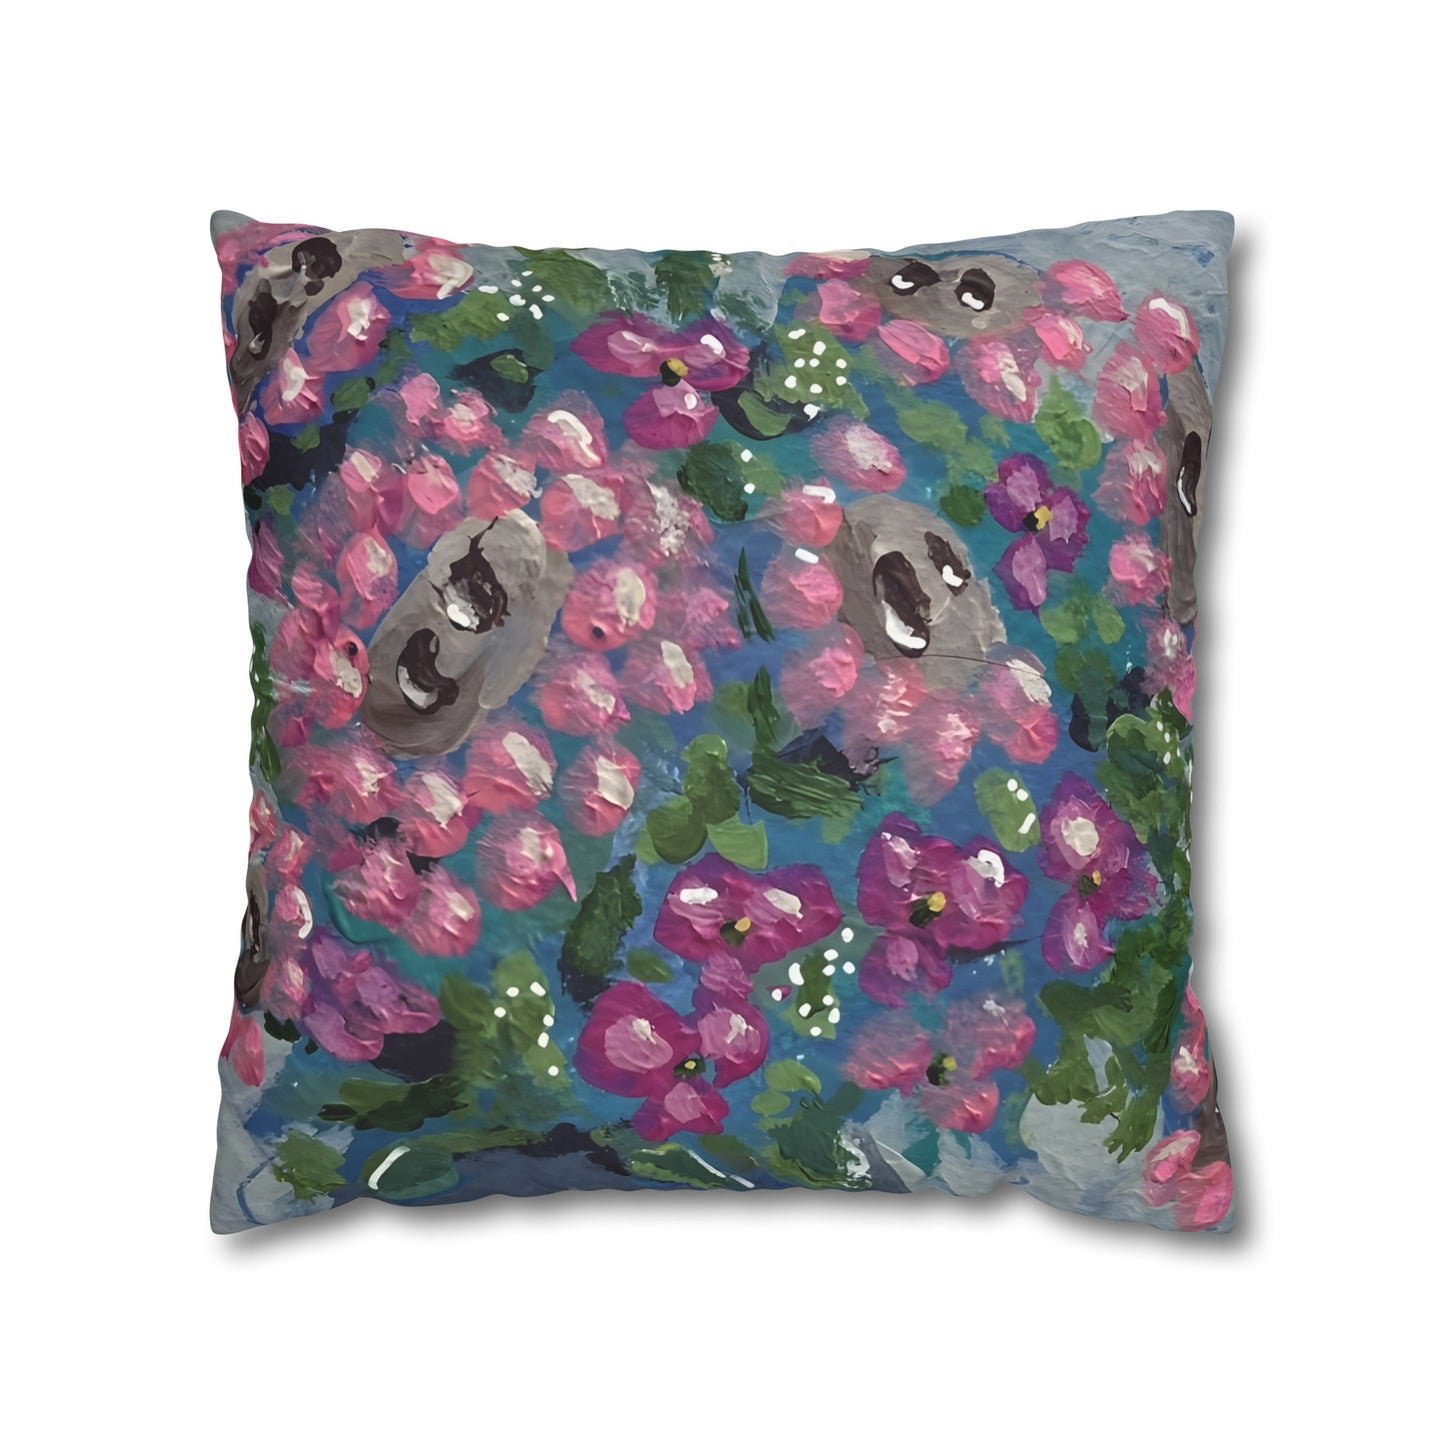 She Snorted When She Laughed  | Sanctuary Blooms Pillow Cover